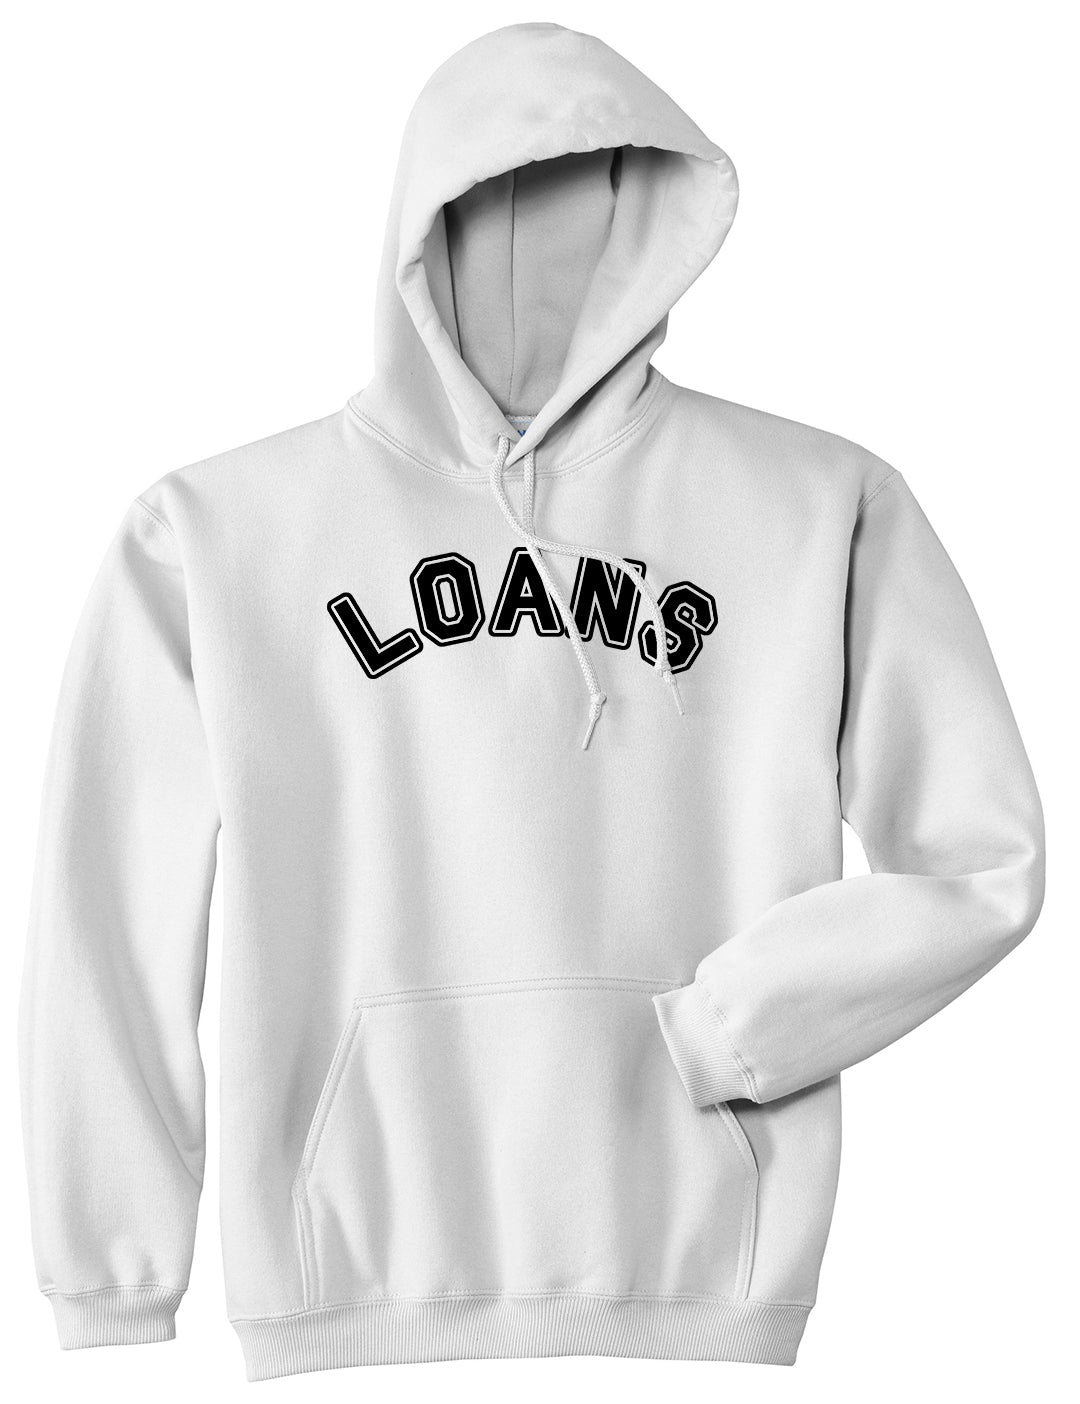 Student Loans College Pullover Hoodie in White